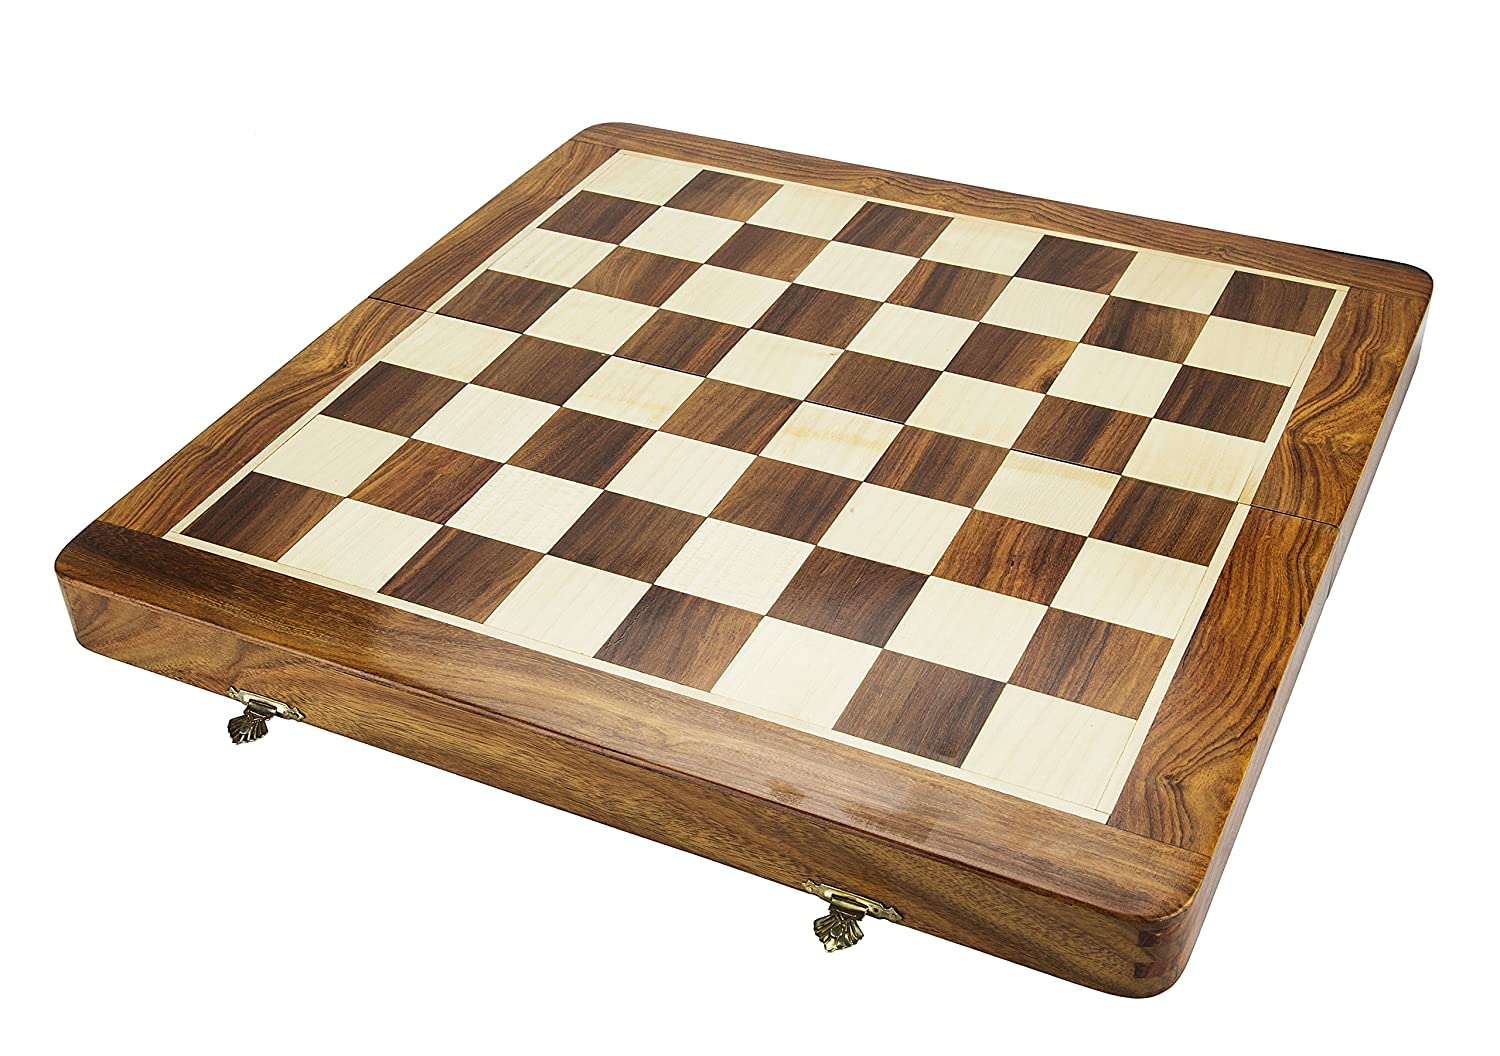 Stuard Magnetic Wooden Non Folding Chess Board Game Set with Pieces